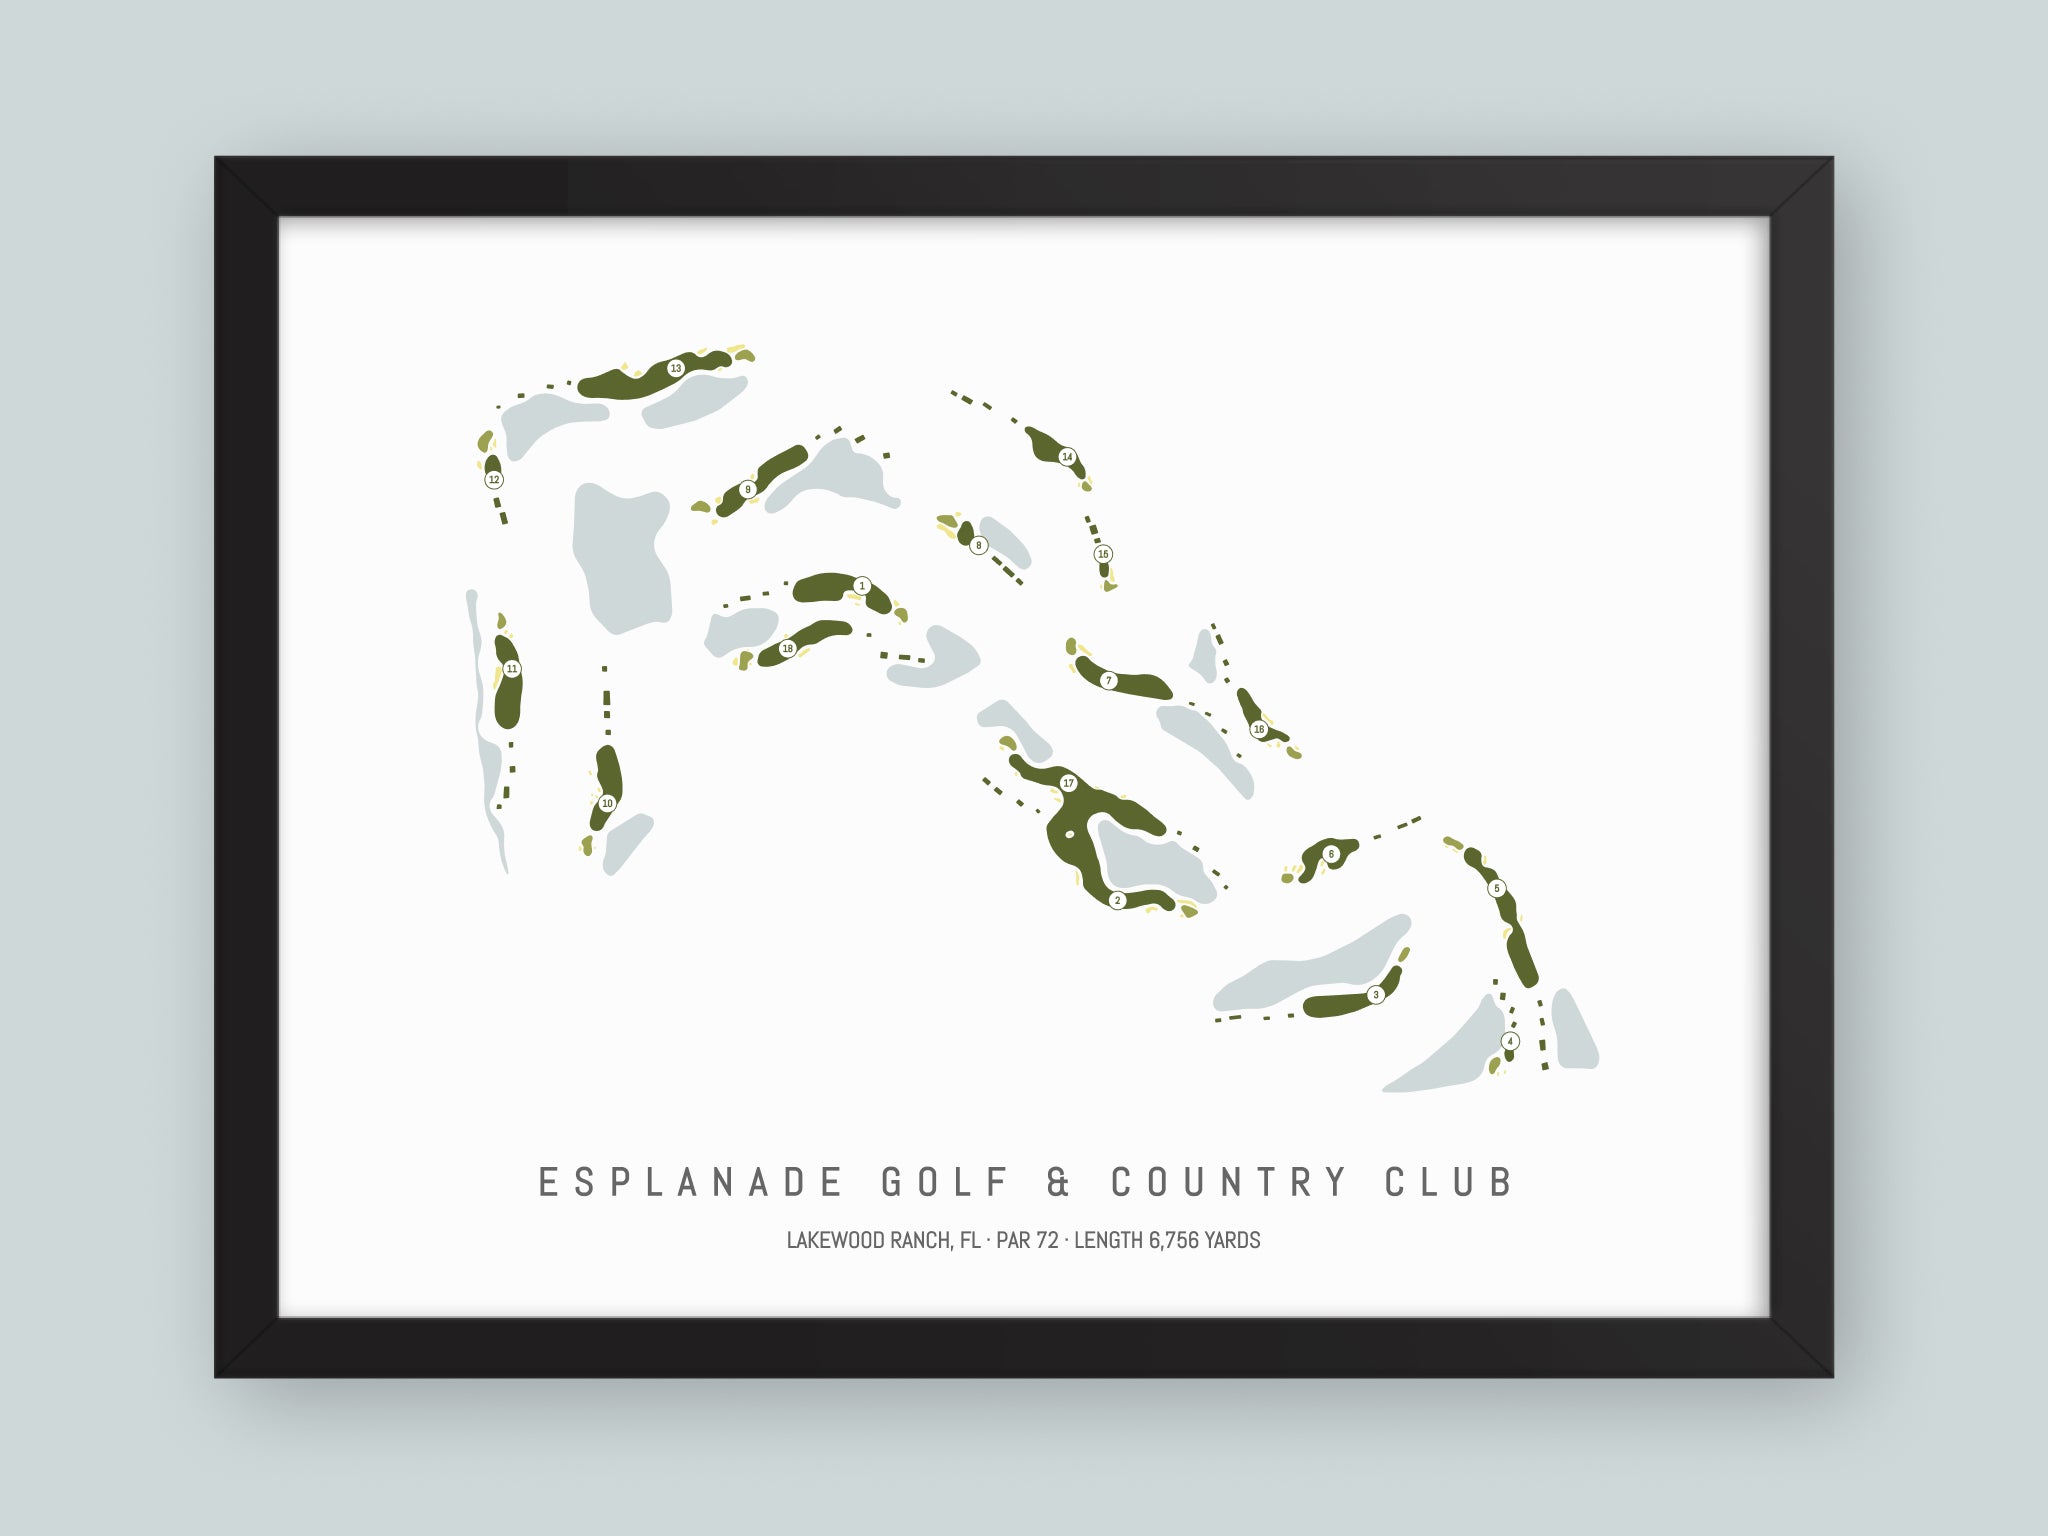 Esplanade-Golf-And-Country-Club-FL--Black-Frame-24x18-With-Hole-Numbers